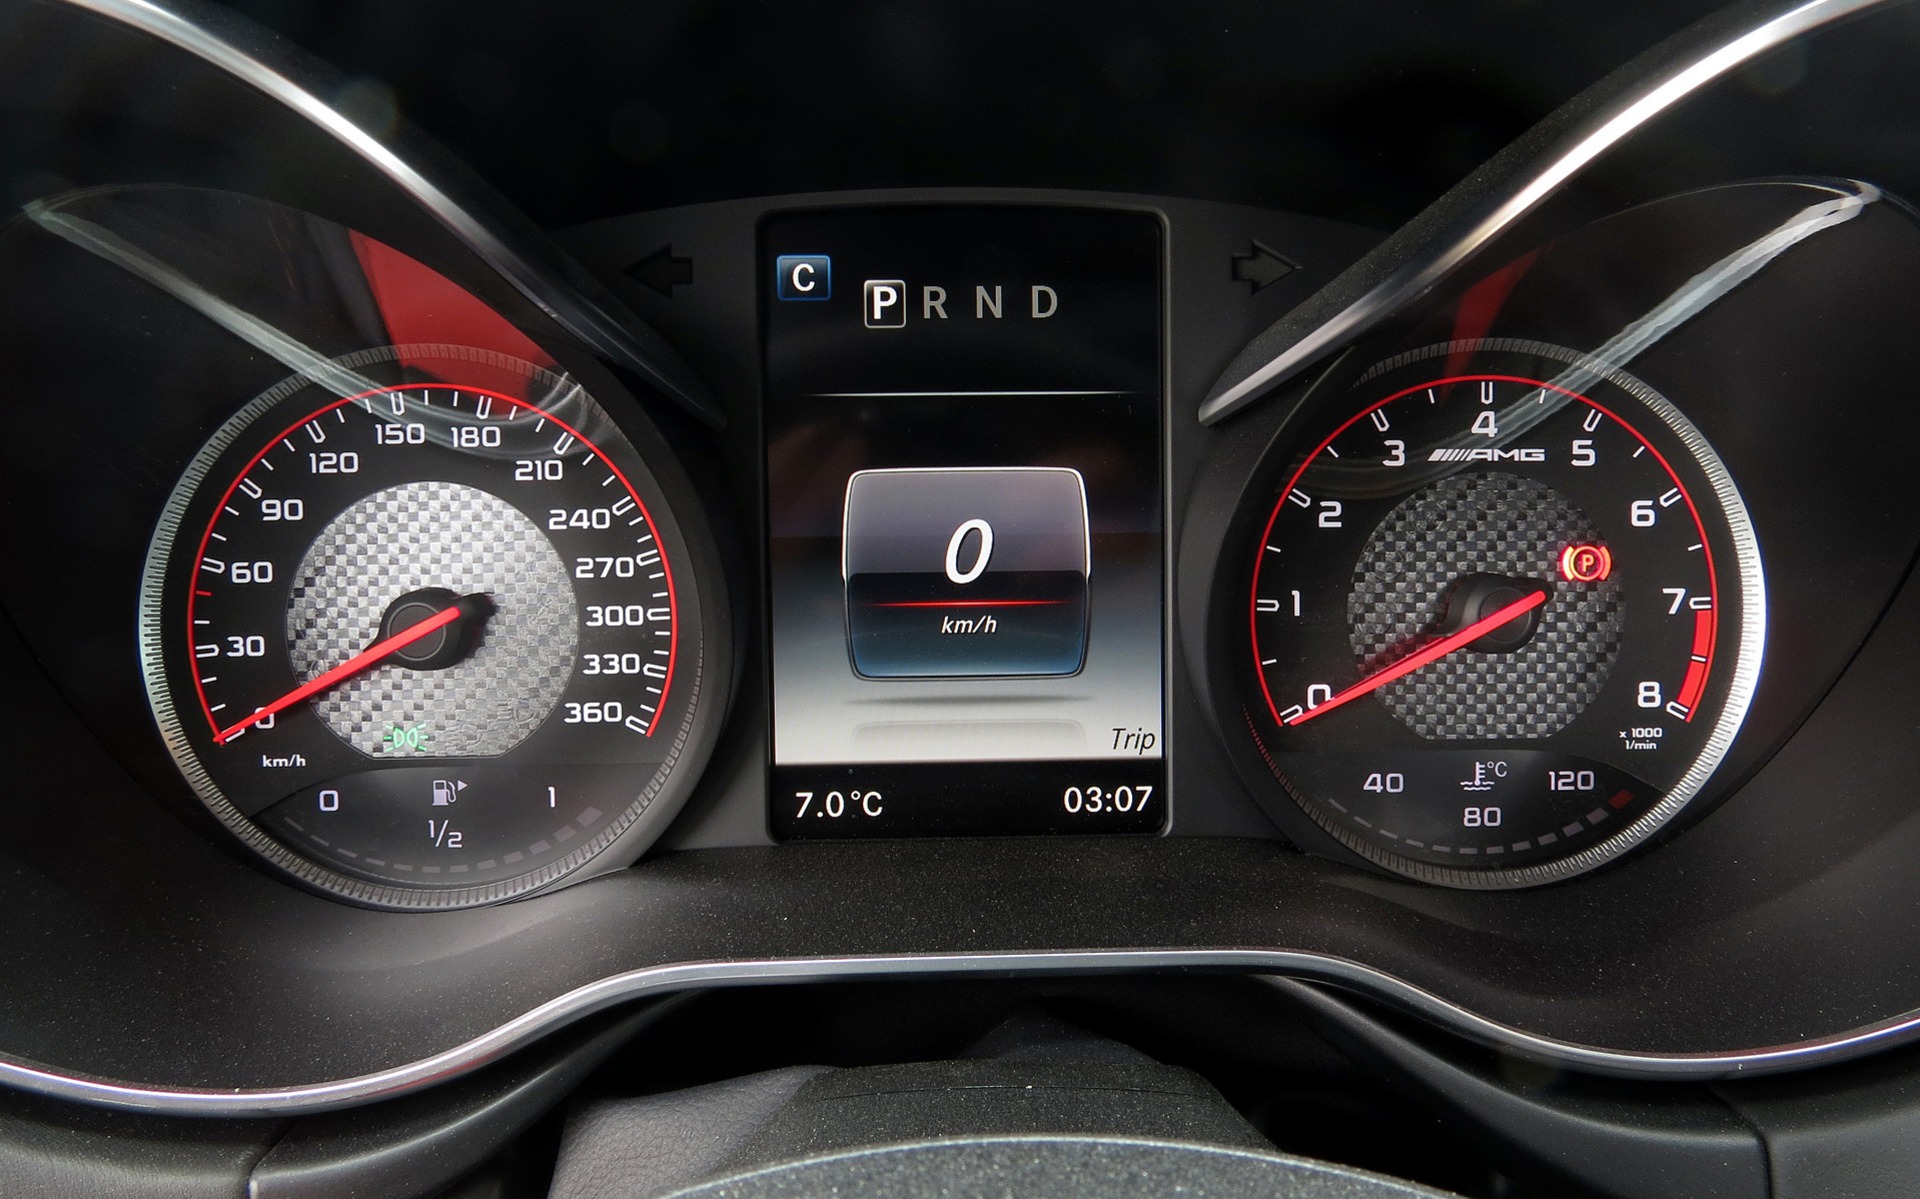 The large dials and clear displays are typical for AMG products.